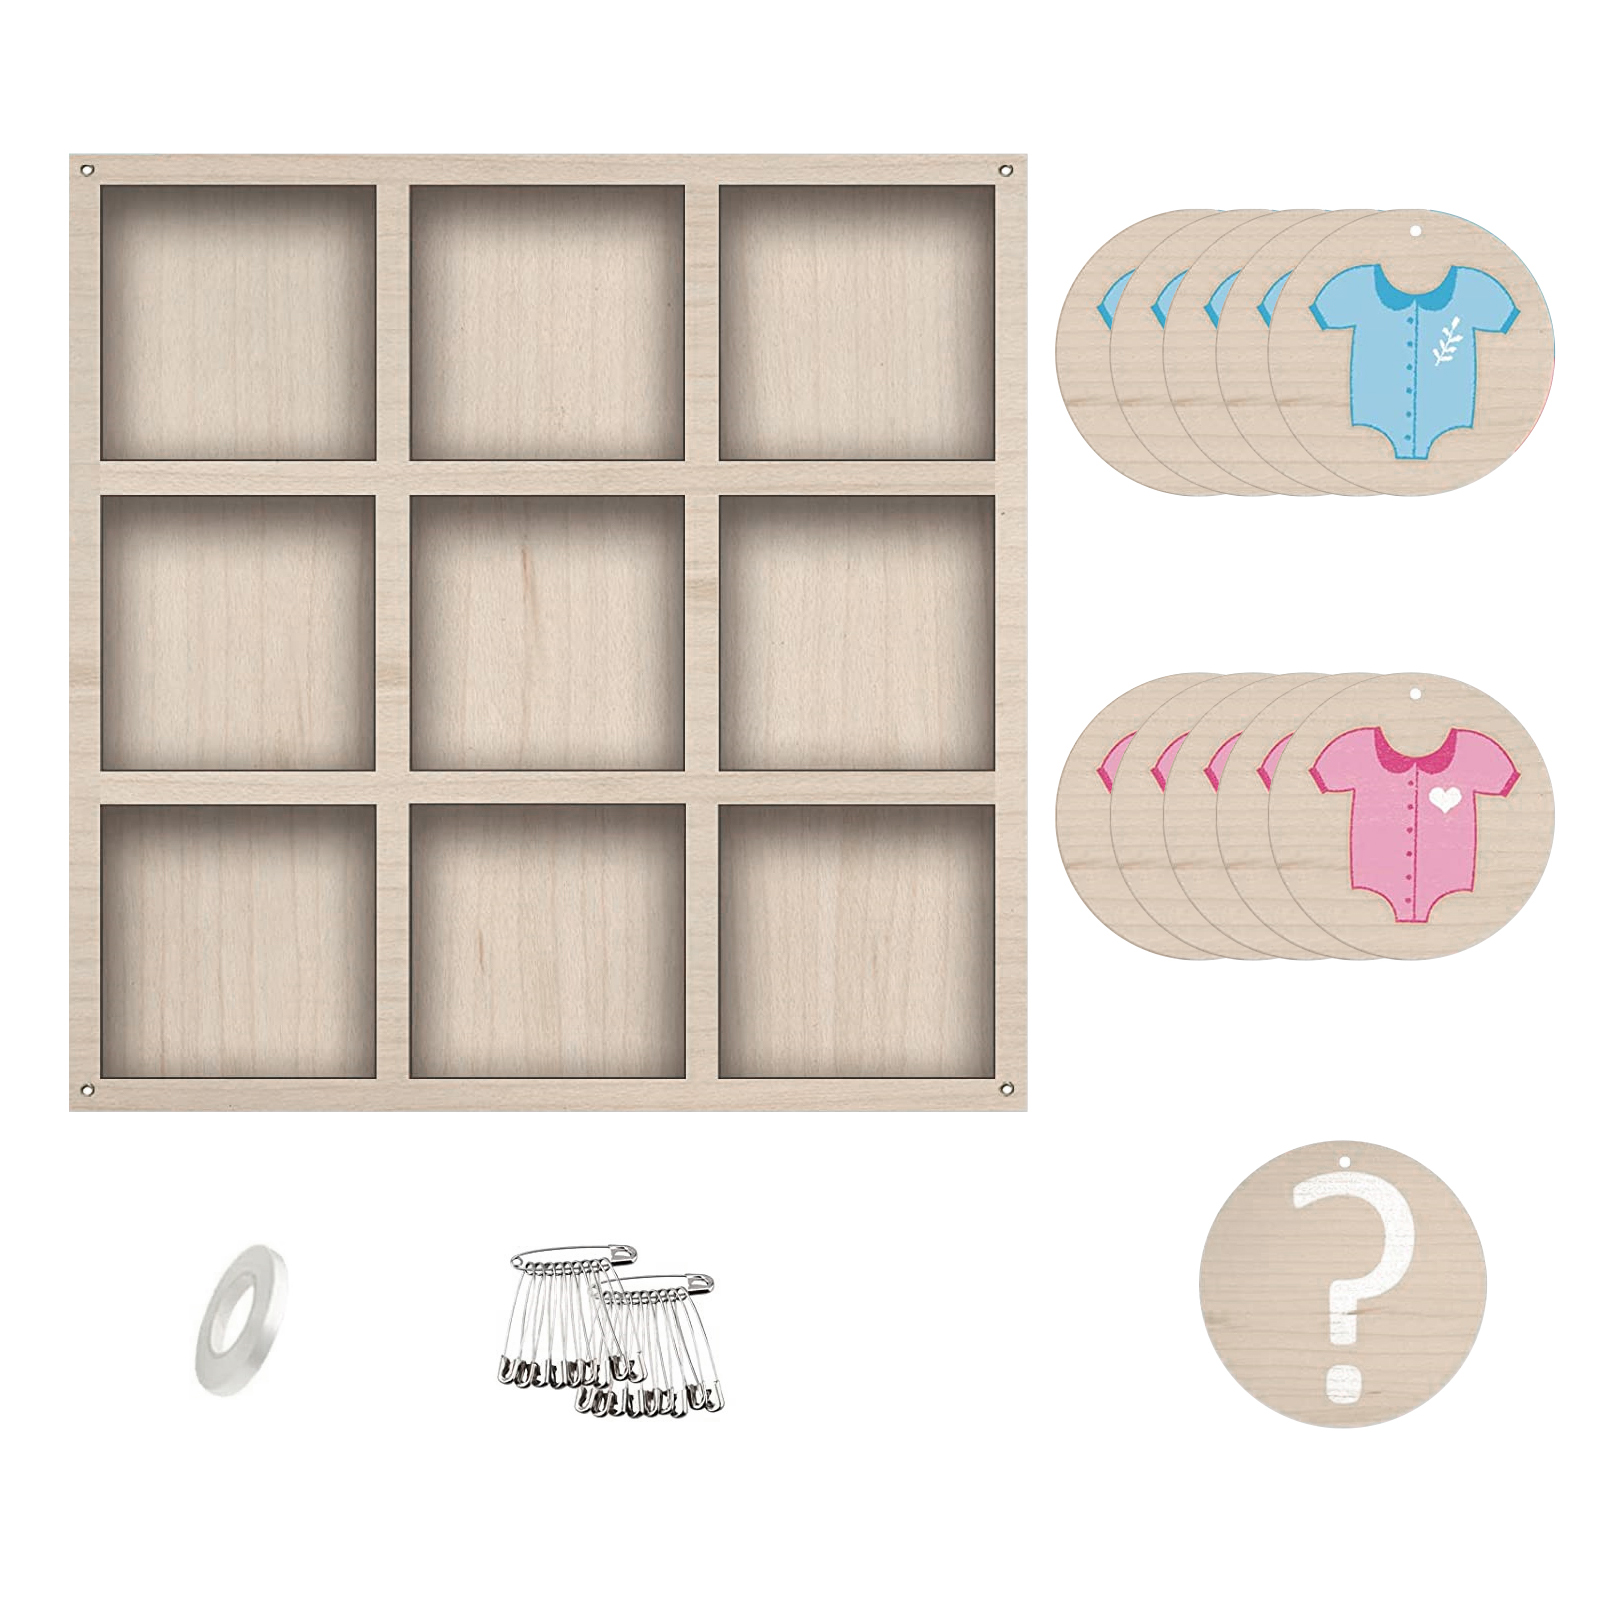 Board Game Durable Baby Gender Reveal Tic Tac Toe Lightweight